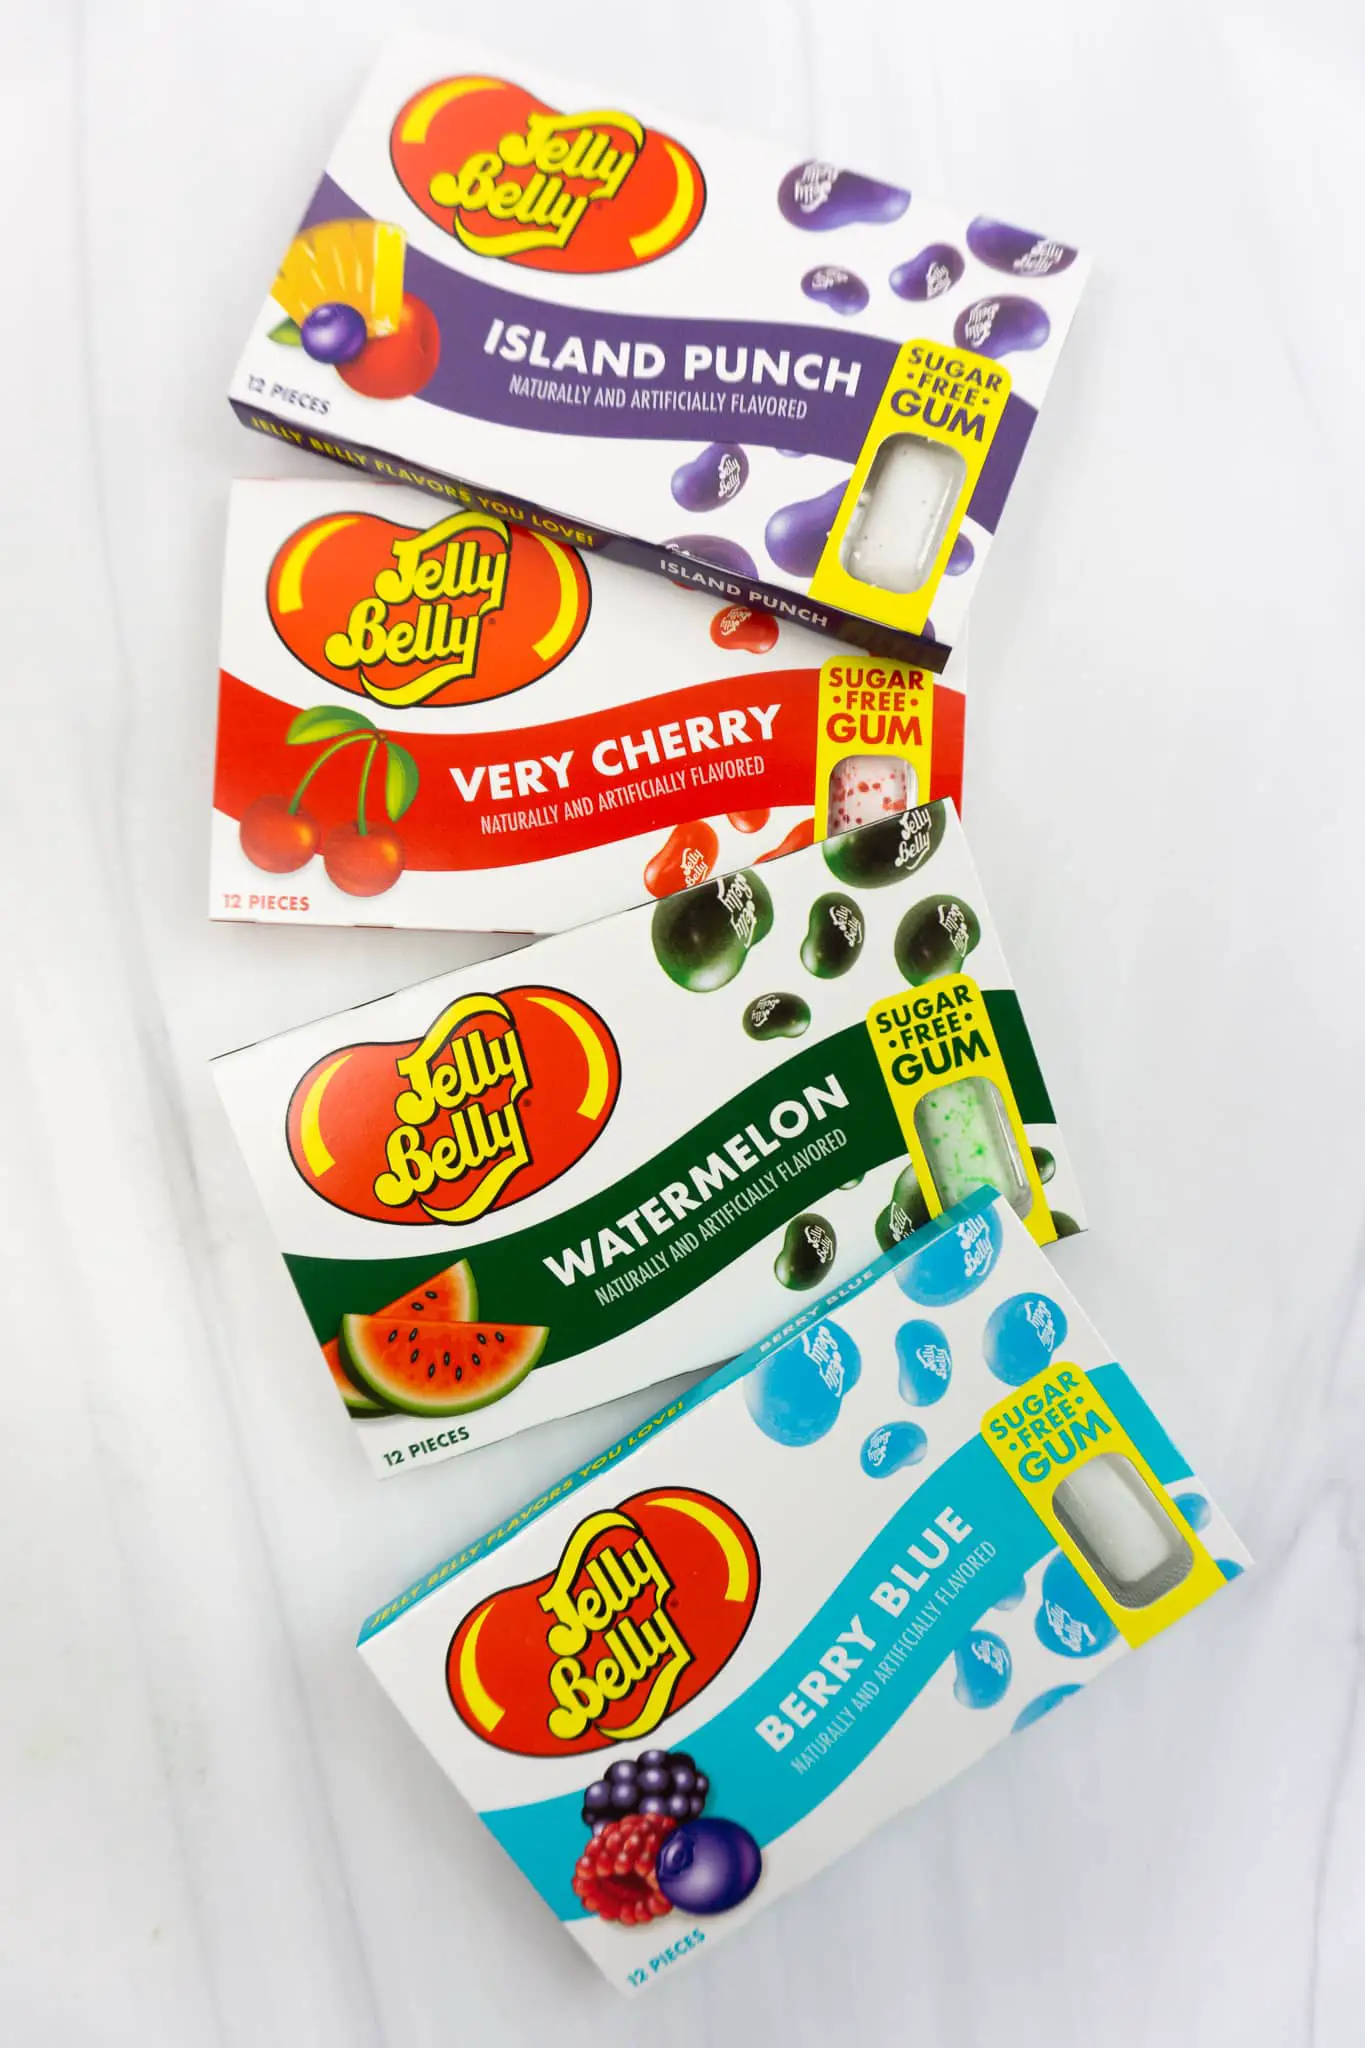 Hold The Jelly Bean! Jelly Belly Has New Sugar Free Gum?